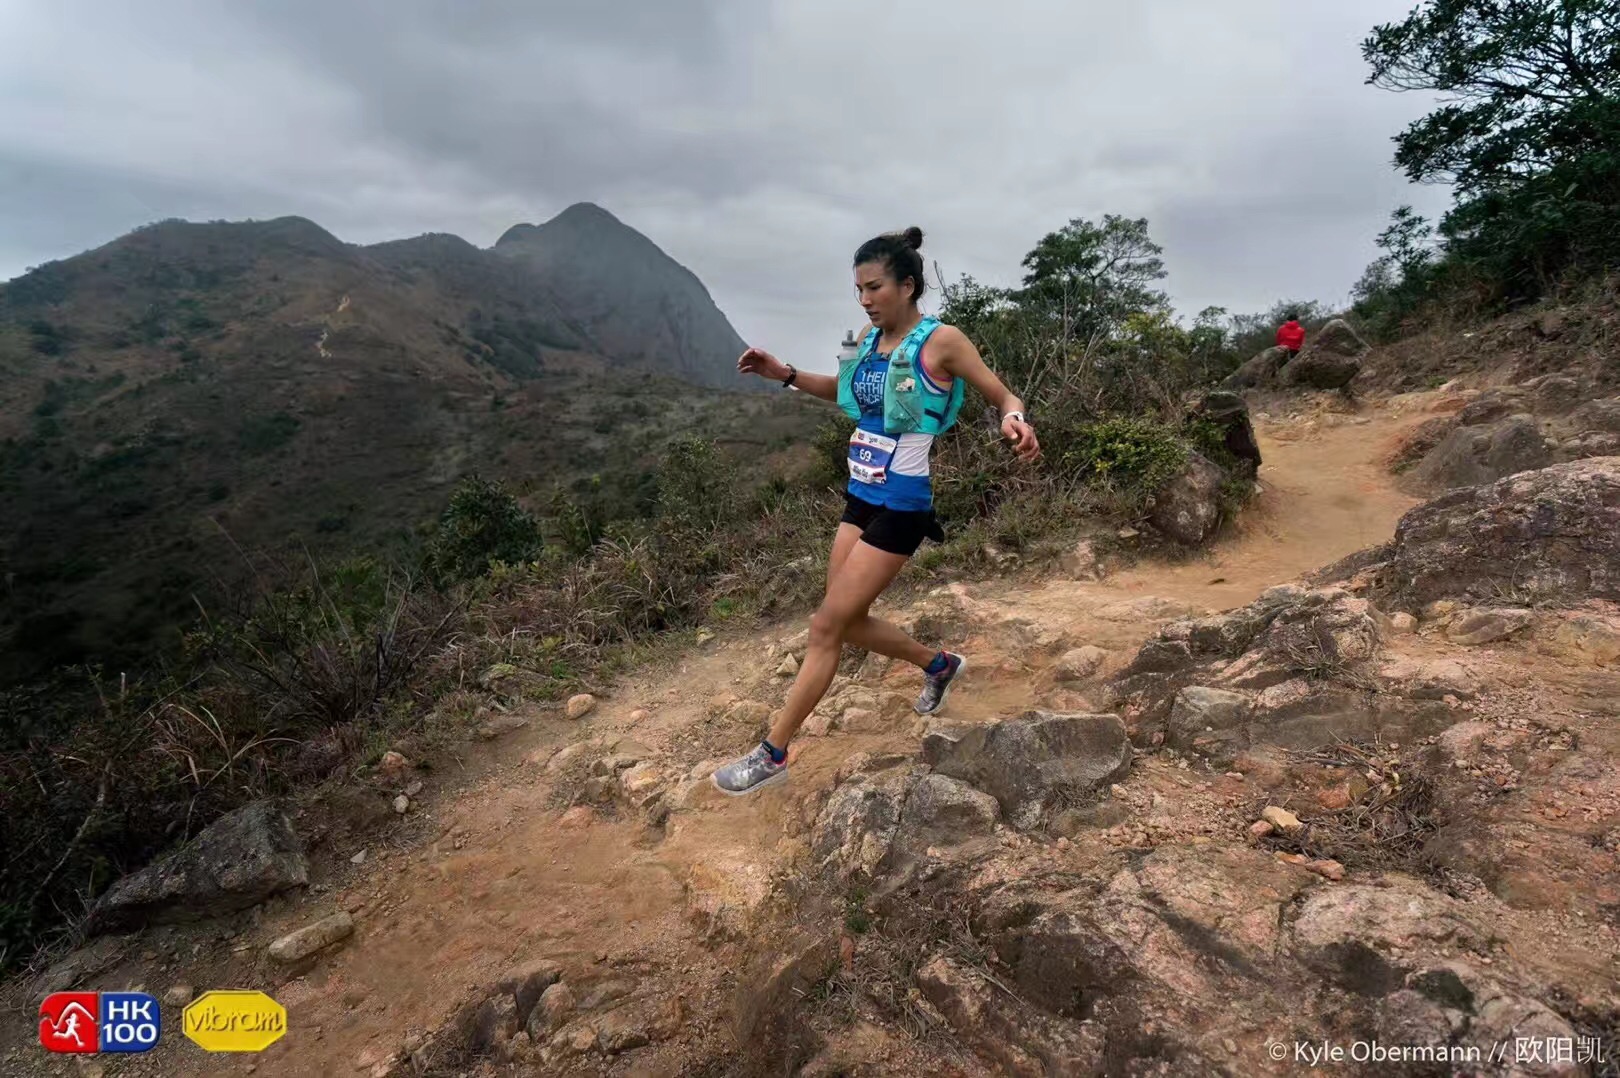 More than 1,800 endurance runners from 60 countries will compete in this weekend’s Vibram Hong Kong 100 Ultra Trail Race. Photo: Hong Kong Tourism Board